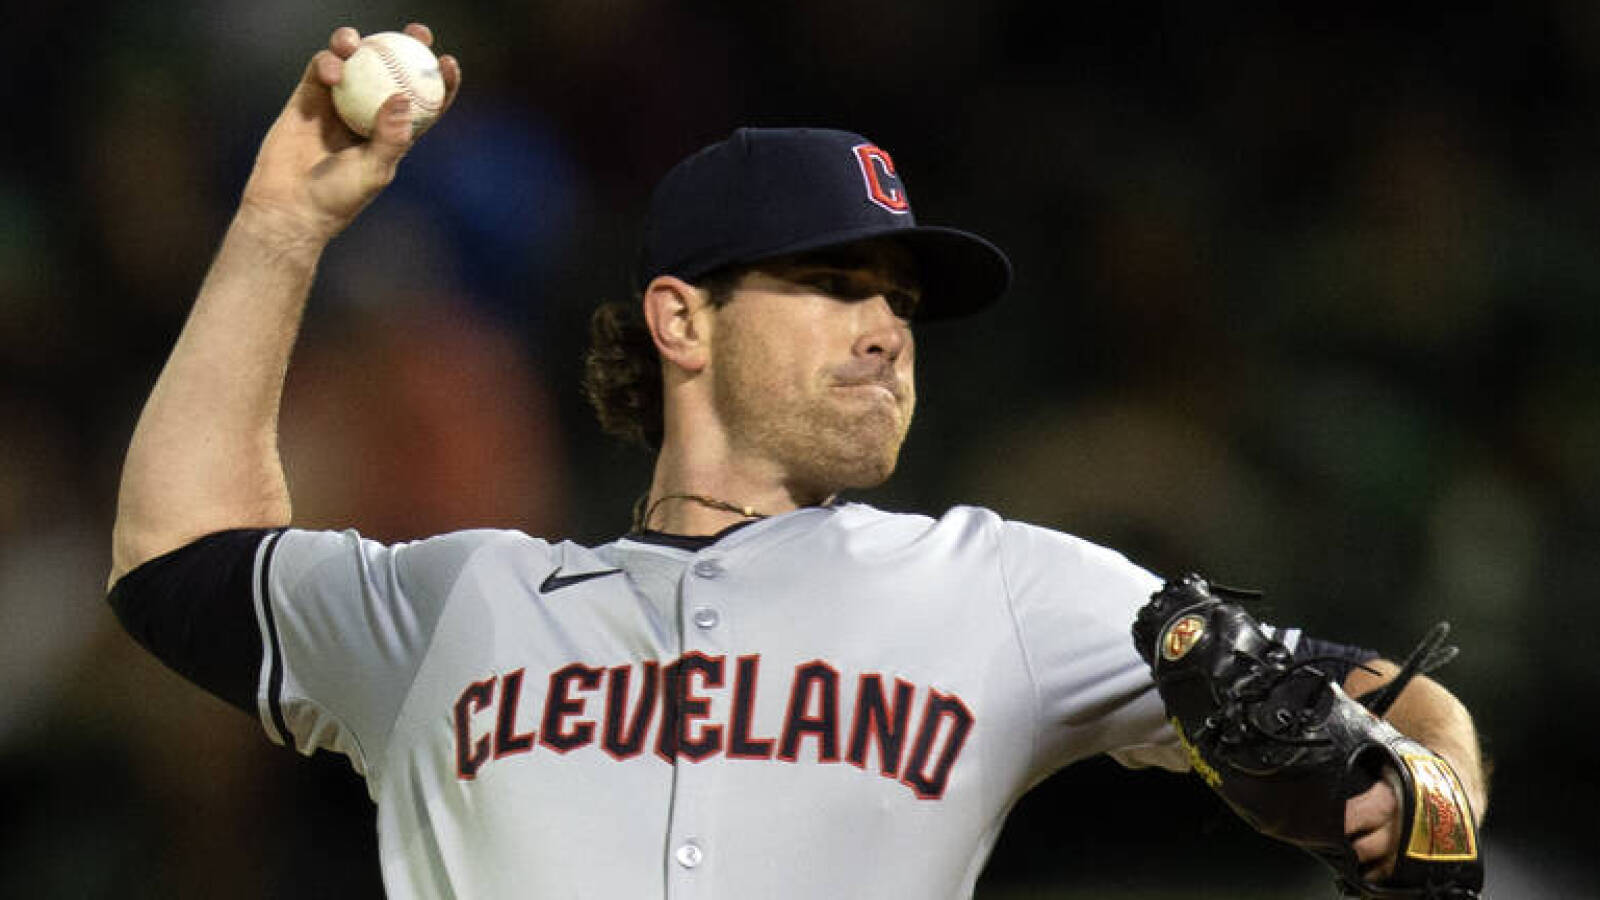 Shane Bieber responds to claim about pitch clock causing arm injuries